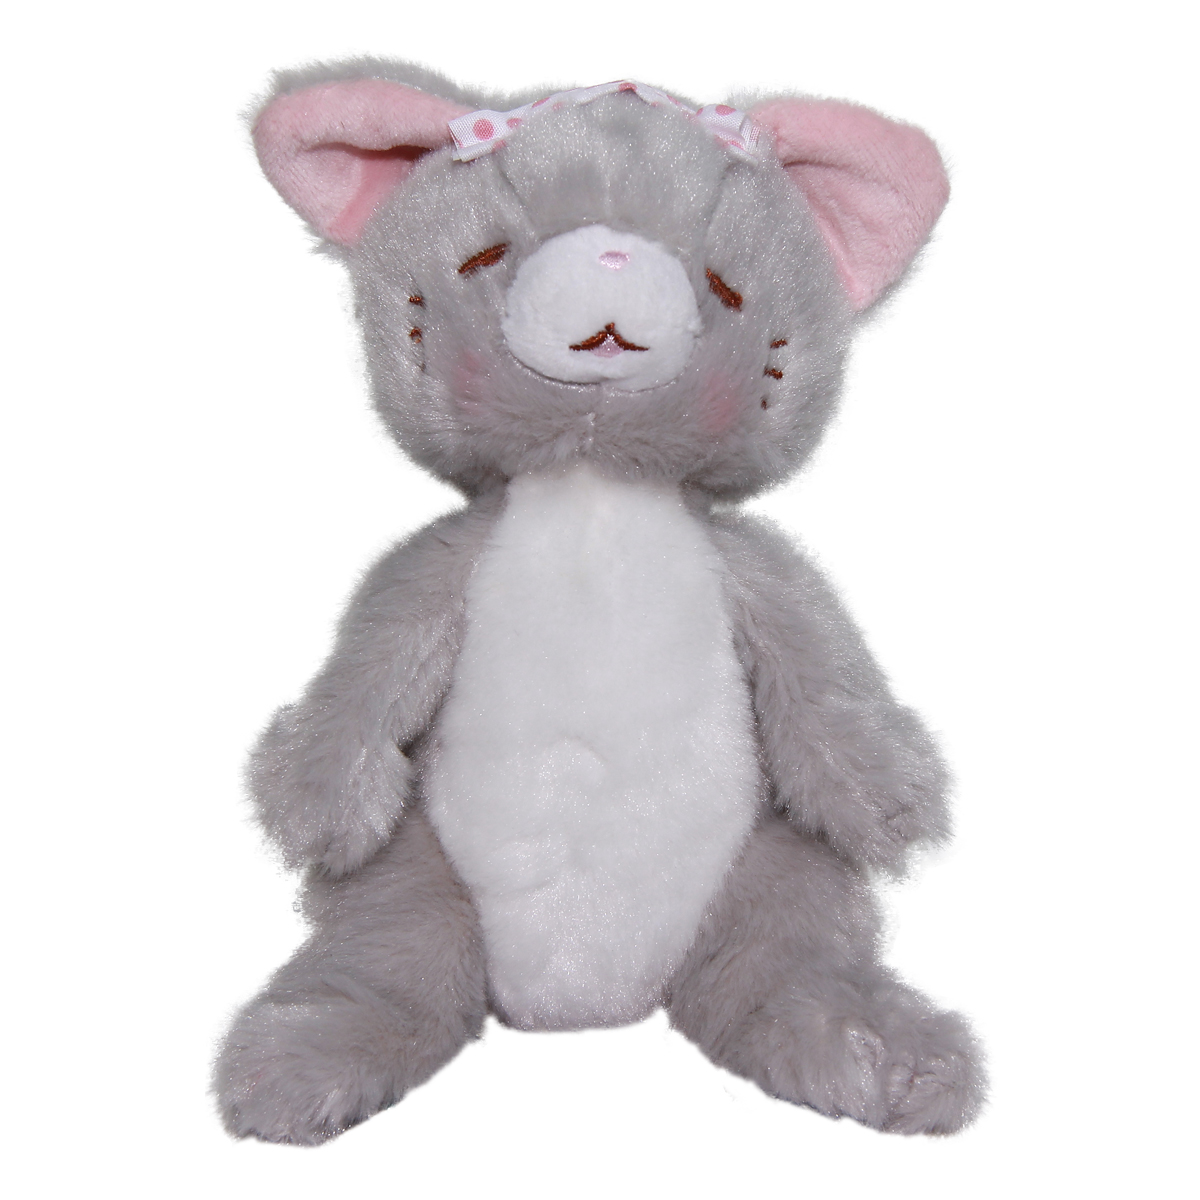 Cat Plush Doll, Hot Springs Collection, Stuffed Animal Toy, Gray, 6 Inches